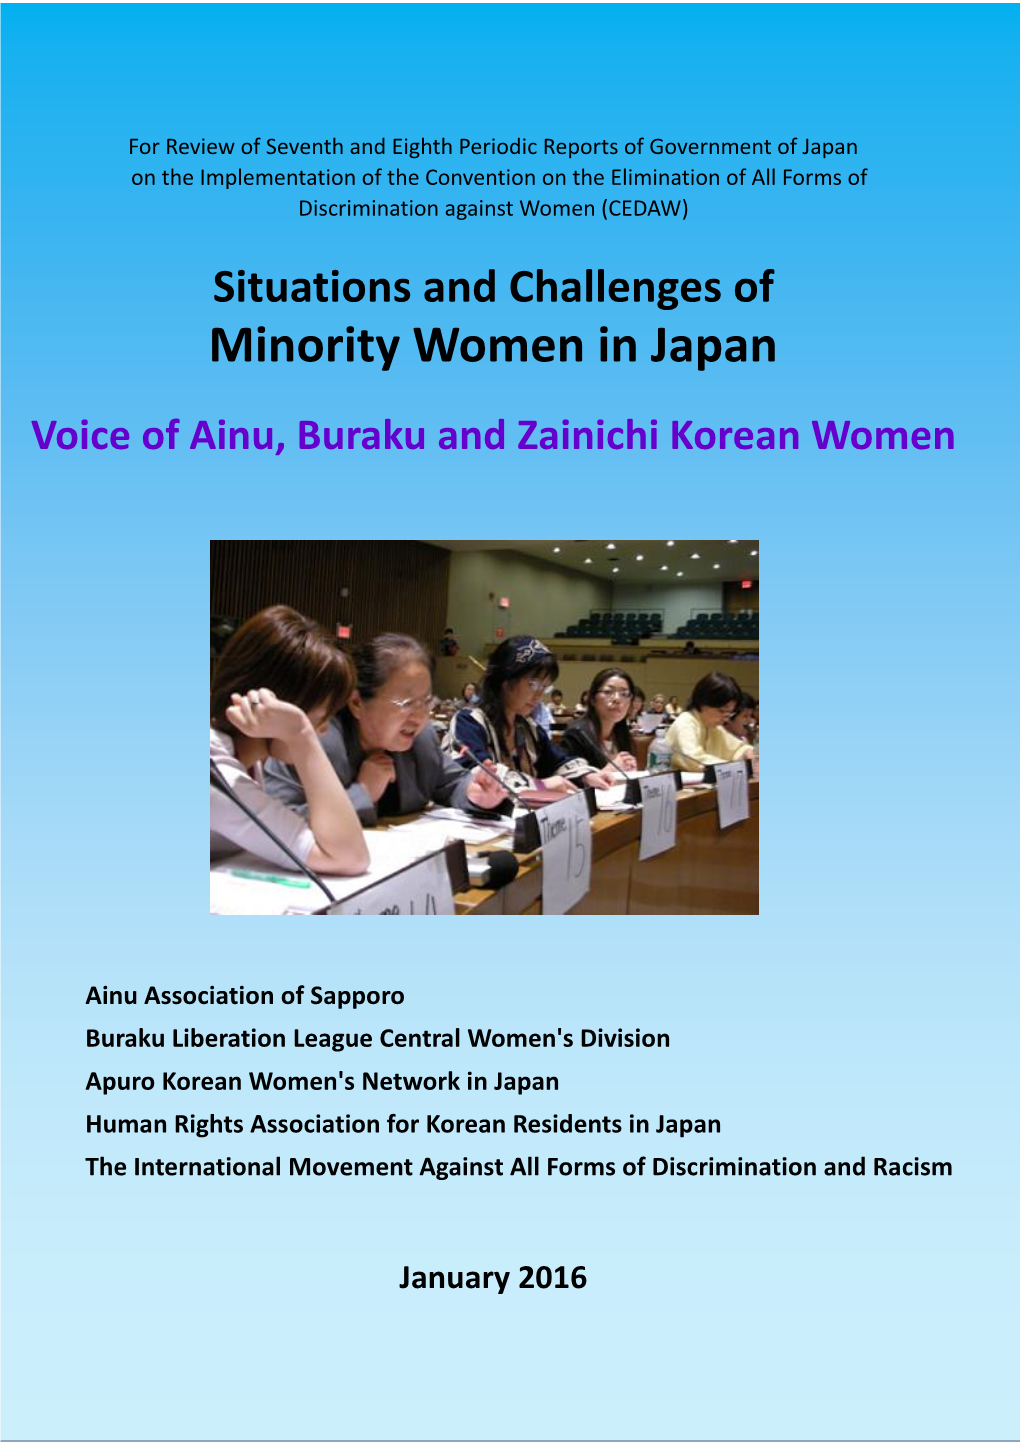 Situations and Challenges of Minority Women in Japan